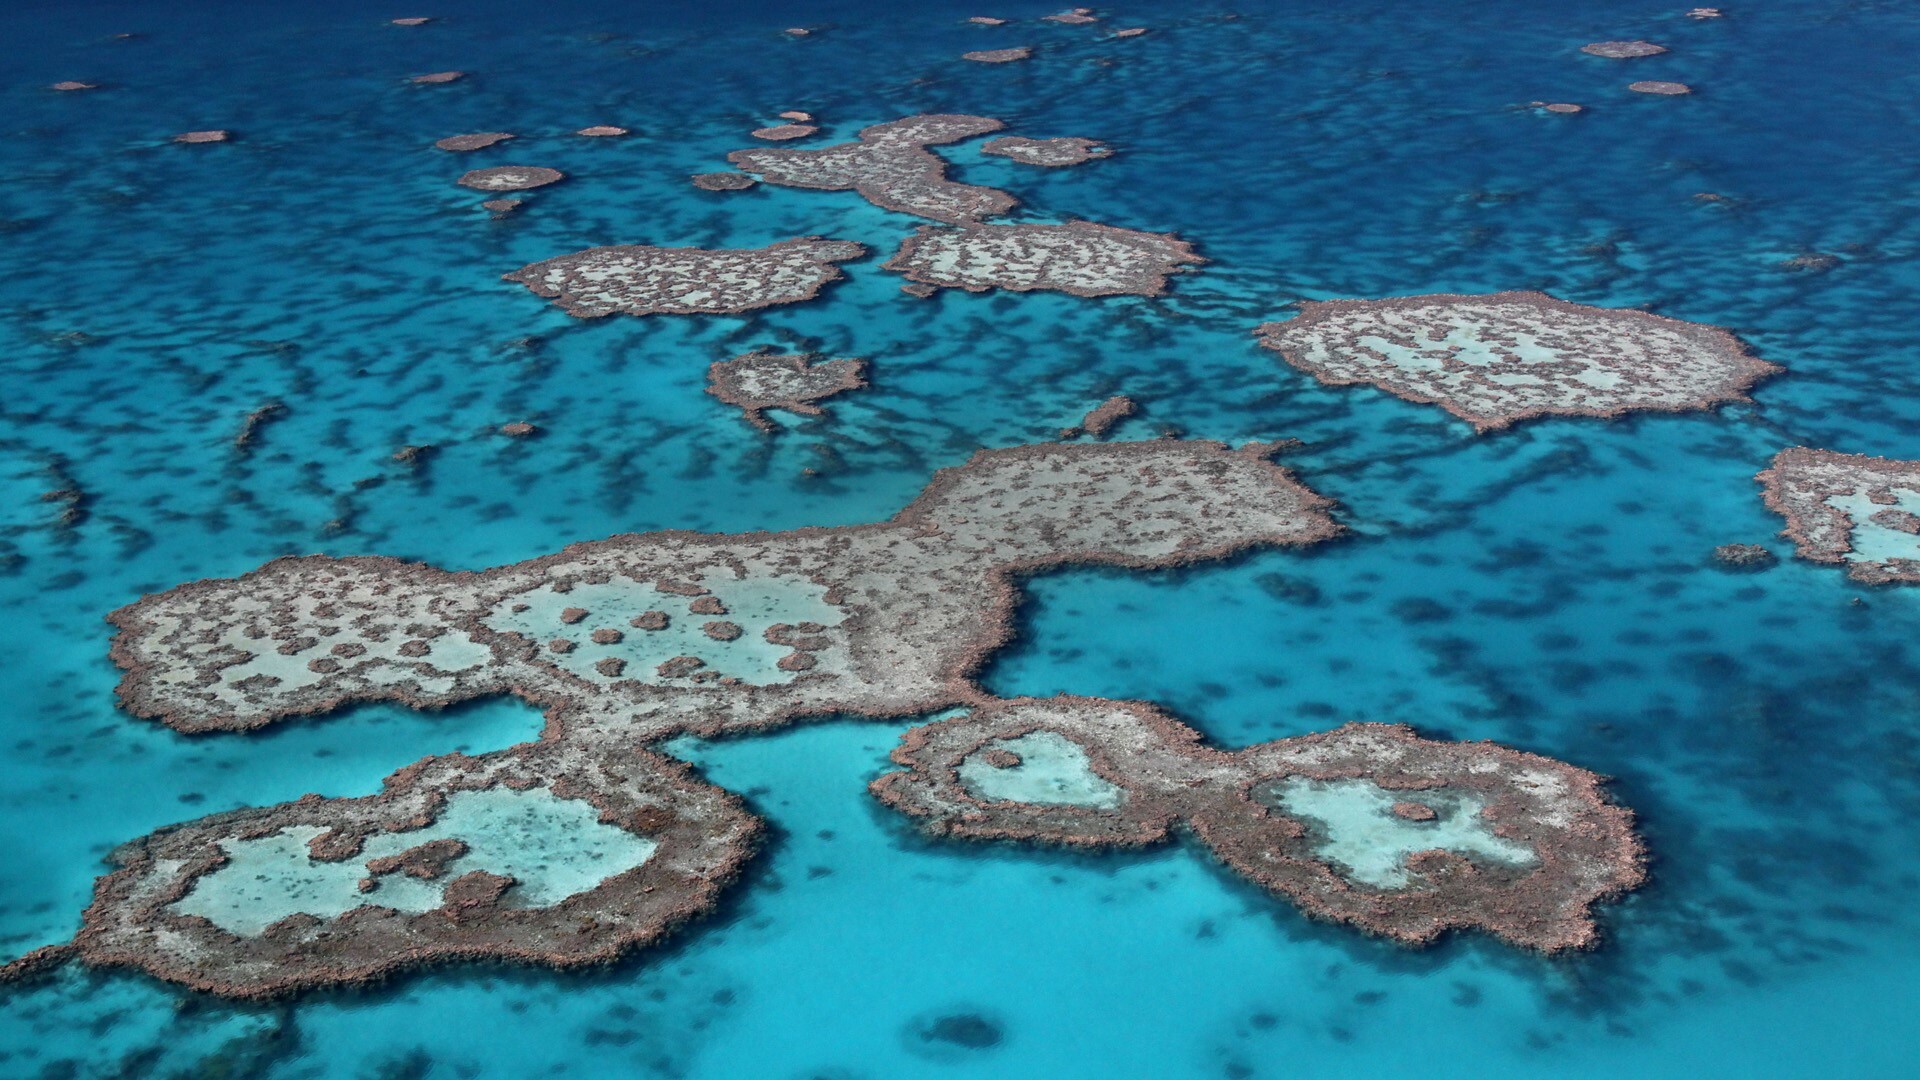 Great Barrier Reef: One of the Seven Wonders of the Natural World and the largest living organism on earth visible from space. 1920x1080 Full HD Background.